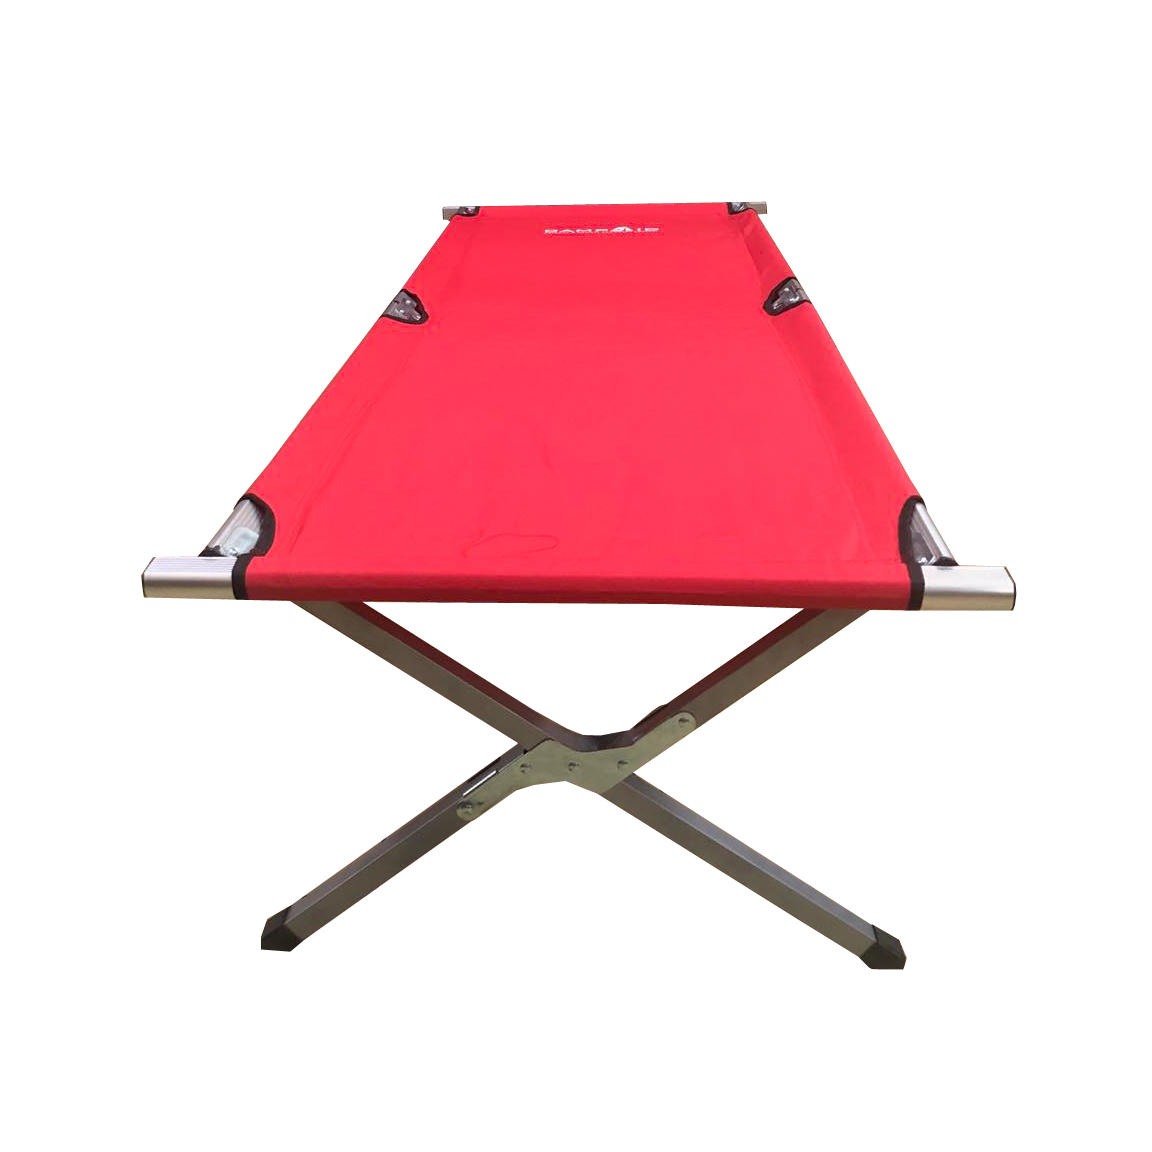 Camp Aid Folding Bed Online, 60% OFF | empow-her.com